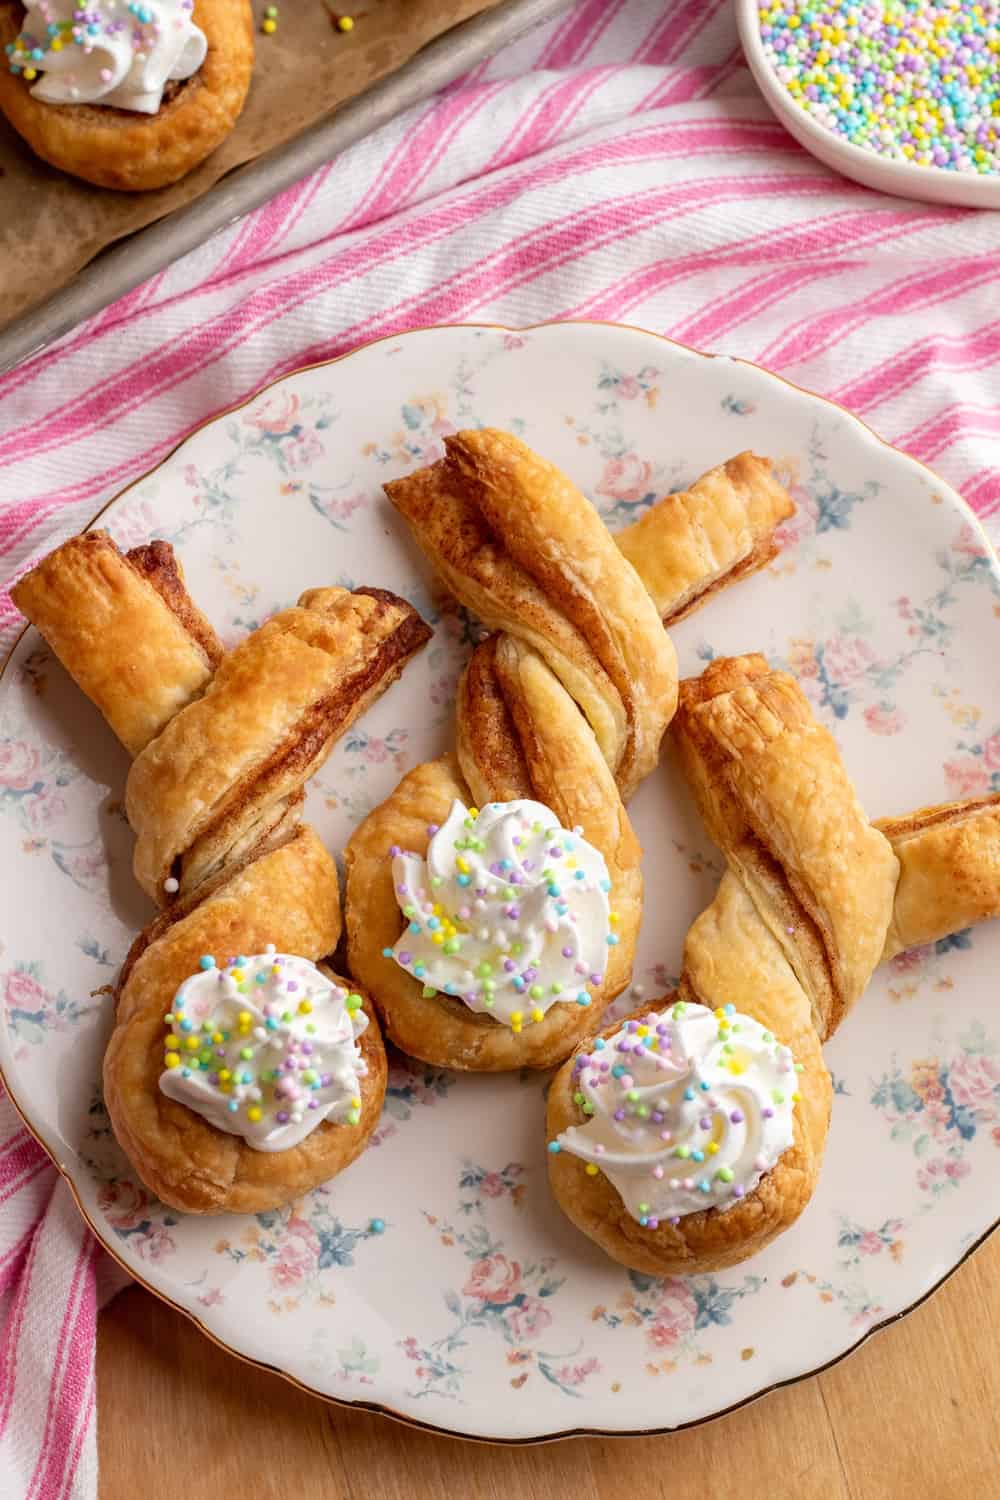 Puff Pastry Bunnies Are An Irresistibly Cute Easter Treat